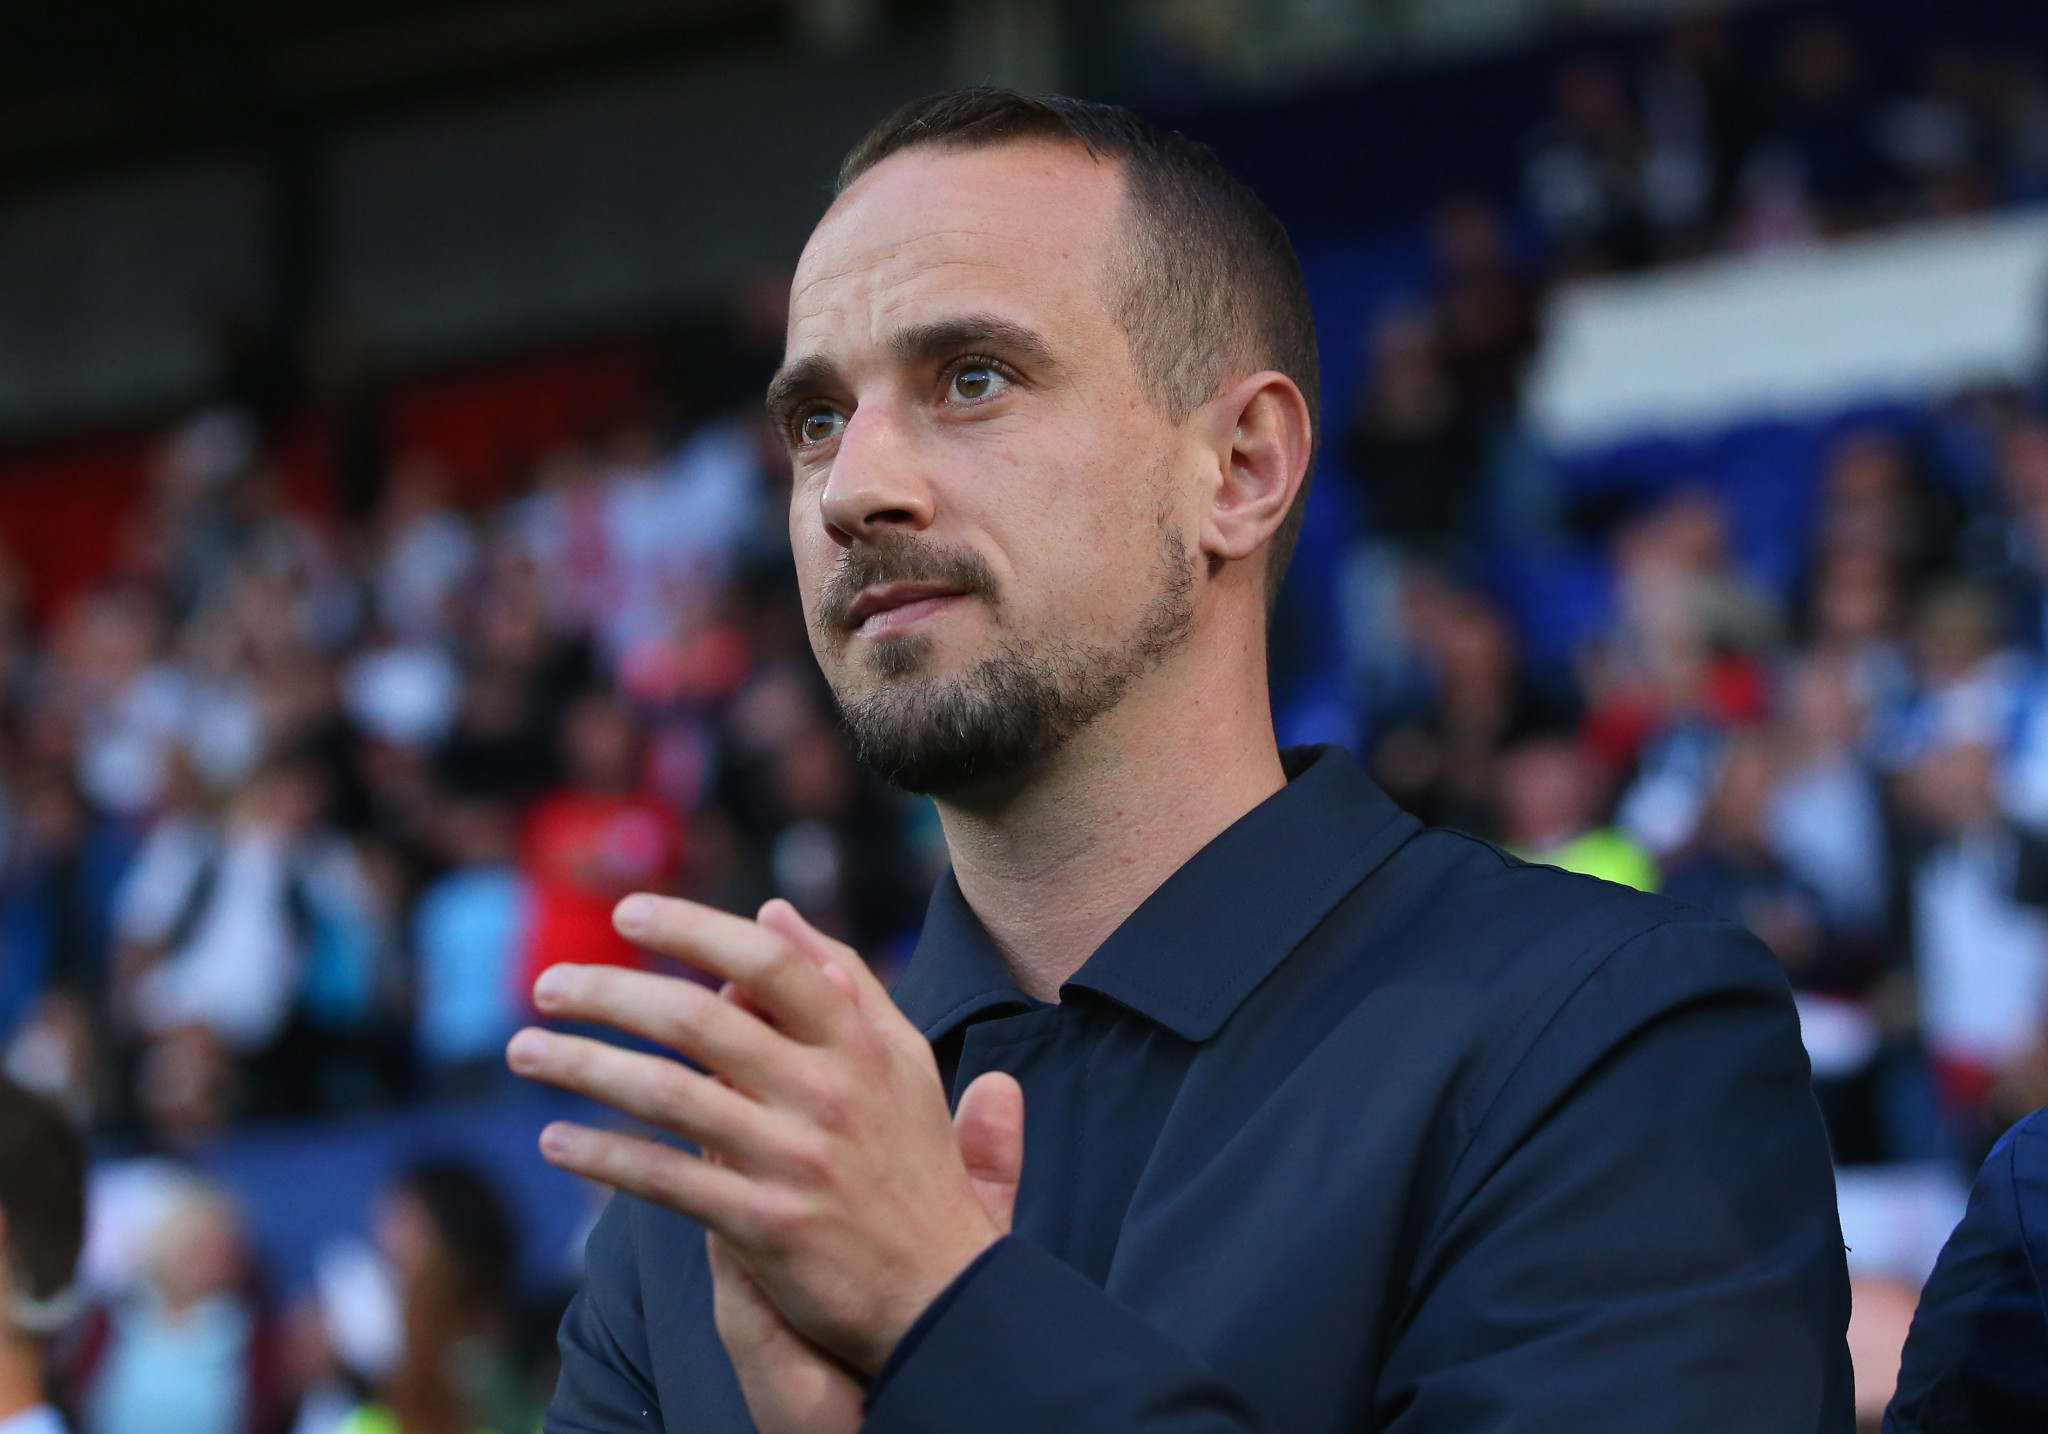 Mark Sampson was sacked as England women's manager in September ©Getty Images